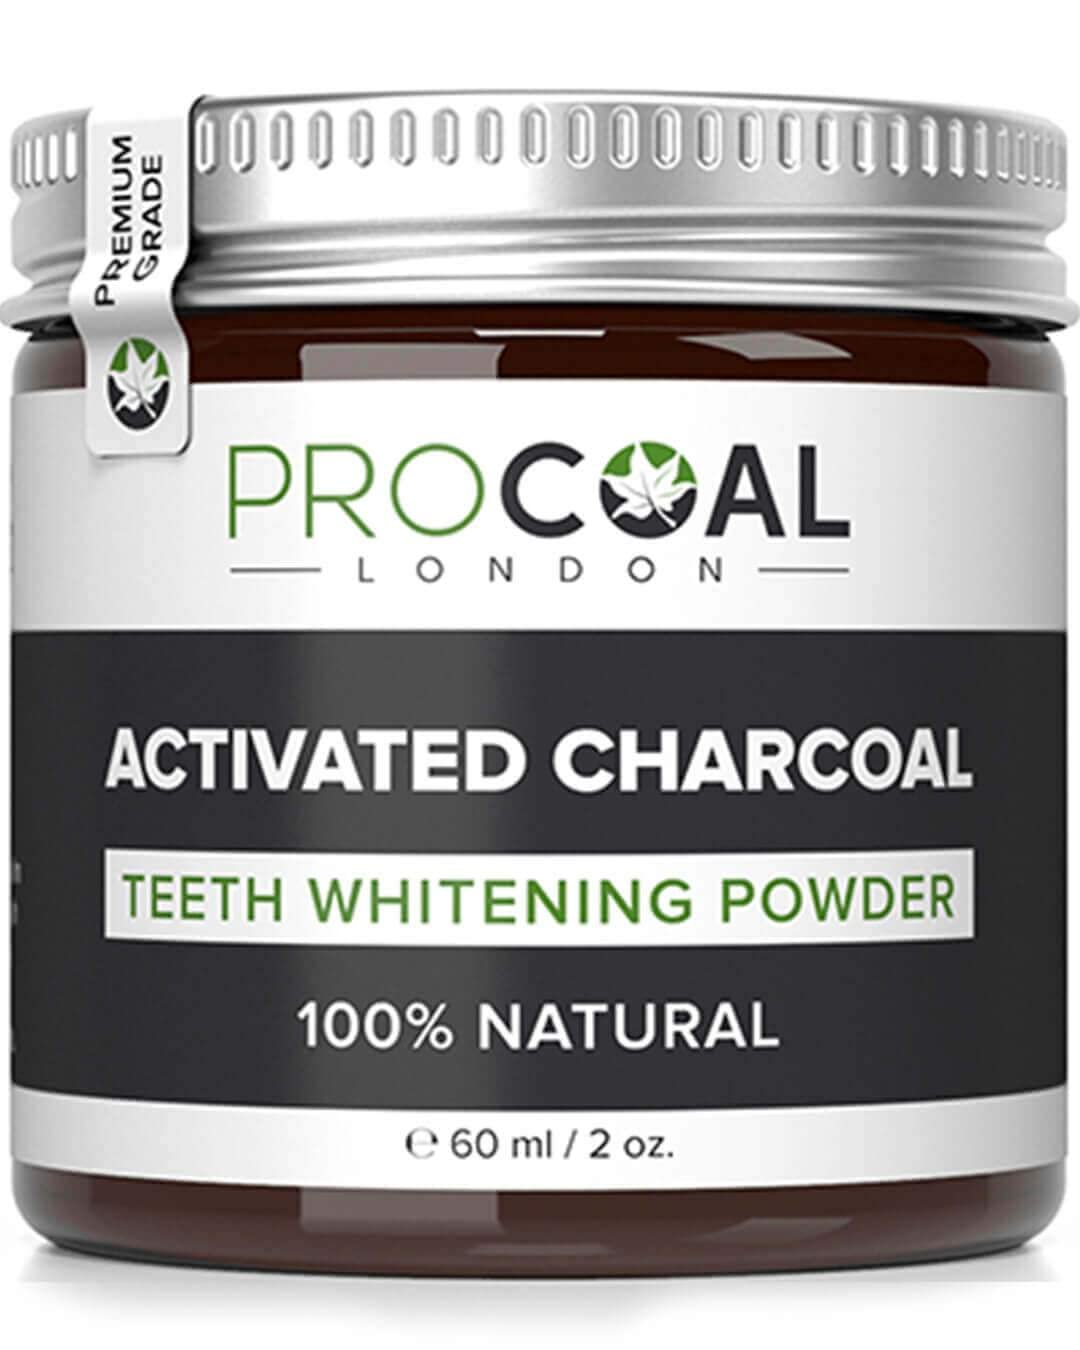 Activated Charcoal Teeth Whitening Powder by Procoal - 100% Natural Charcoal Teeth Whitening Toothpaste, Enamel-Safe, No Additives, No Fillers, No Artificial Flavour, Made in The UK